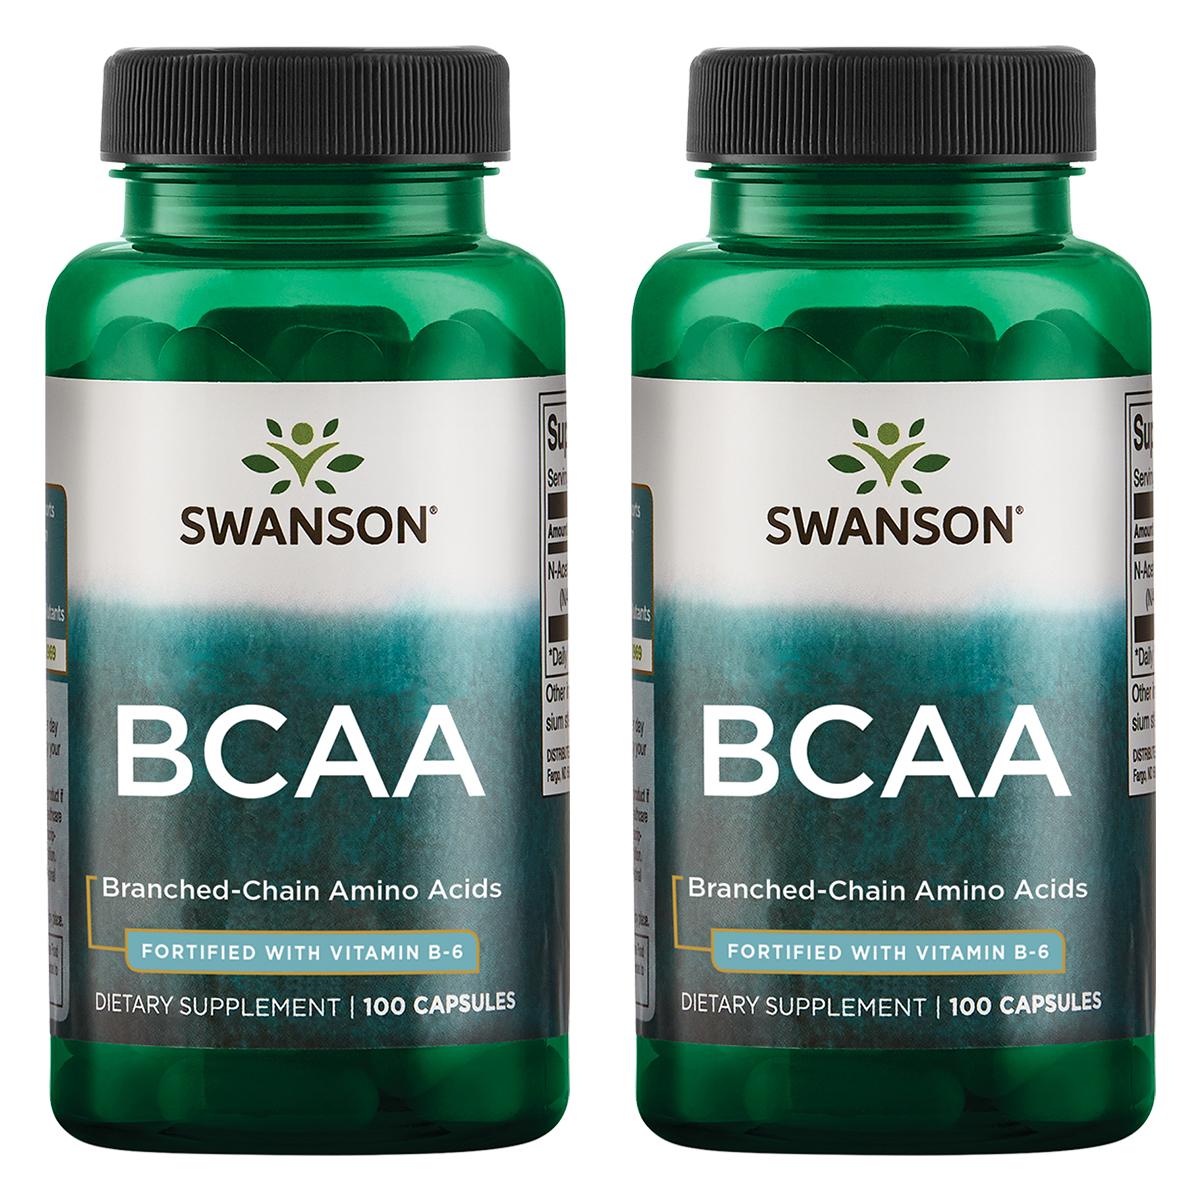 Swanson Premium Bcaa Branched-Chain Amino Acids - Fortified with Vitamin B6 2 Pack 100 Caps